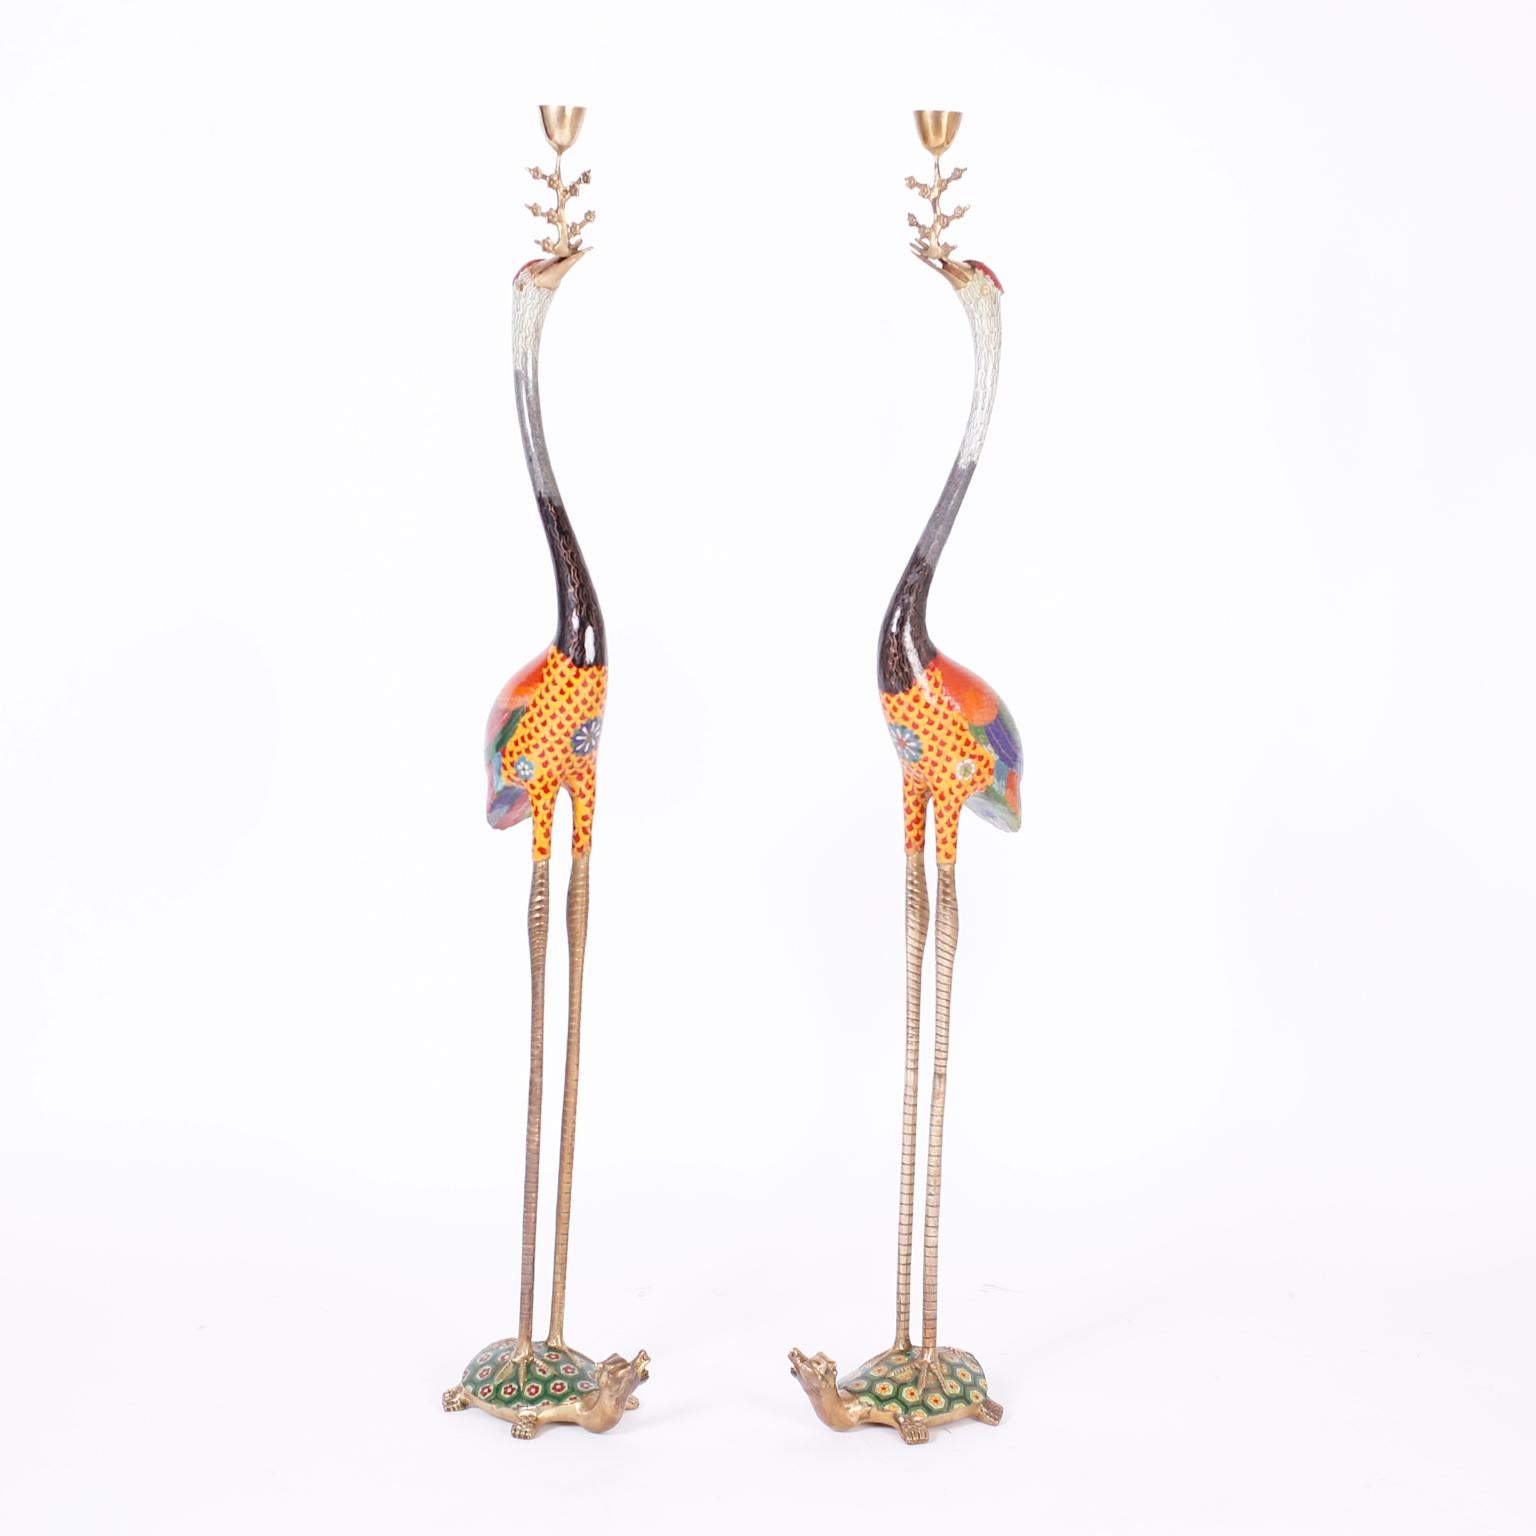 Pair of Chinese cloisonné or enamel on brass cranes or storks holding candle cups in their beaks. The birds are decorated with colorful stylized feathers and stand on enameled turtles with dragon heads.